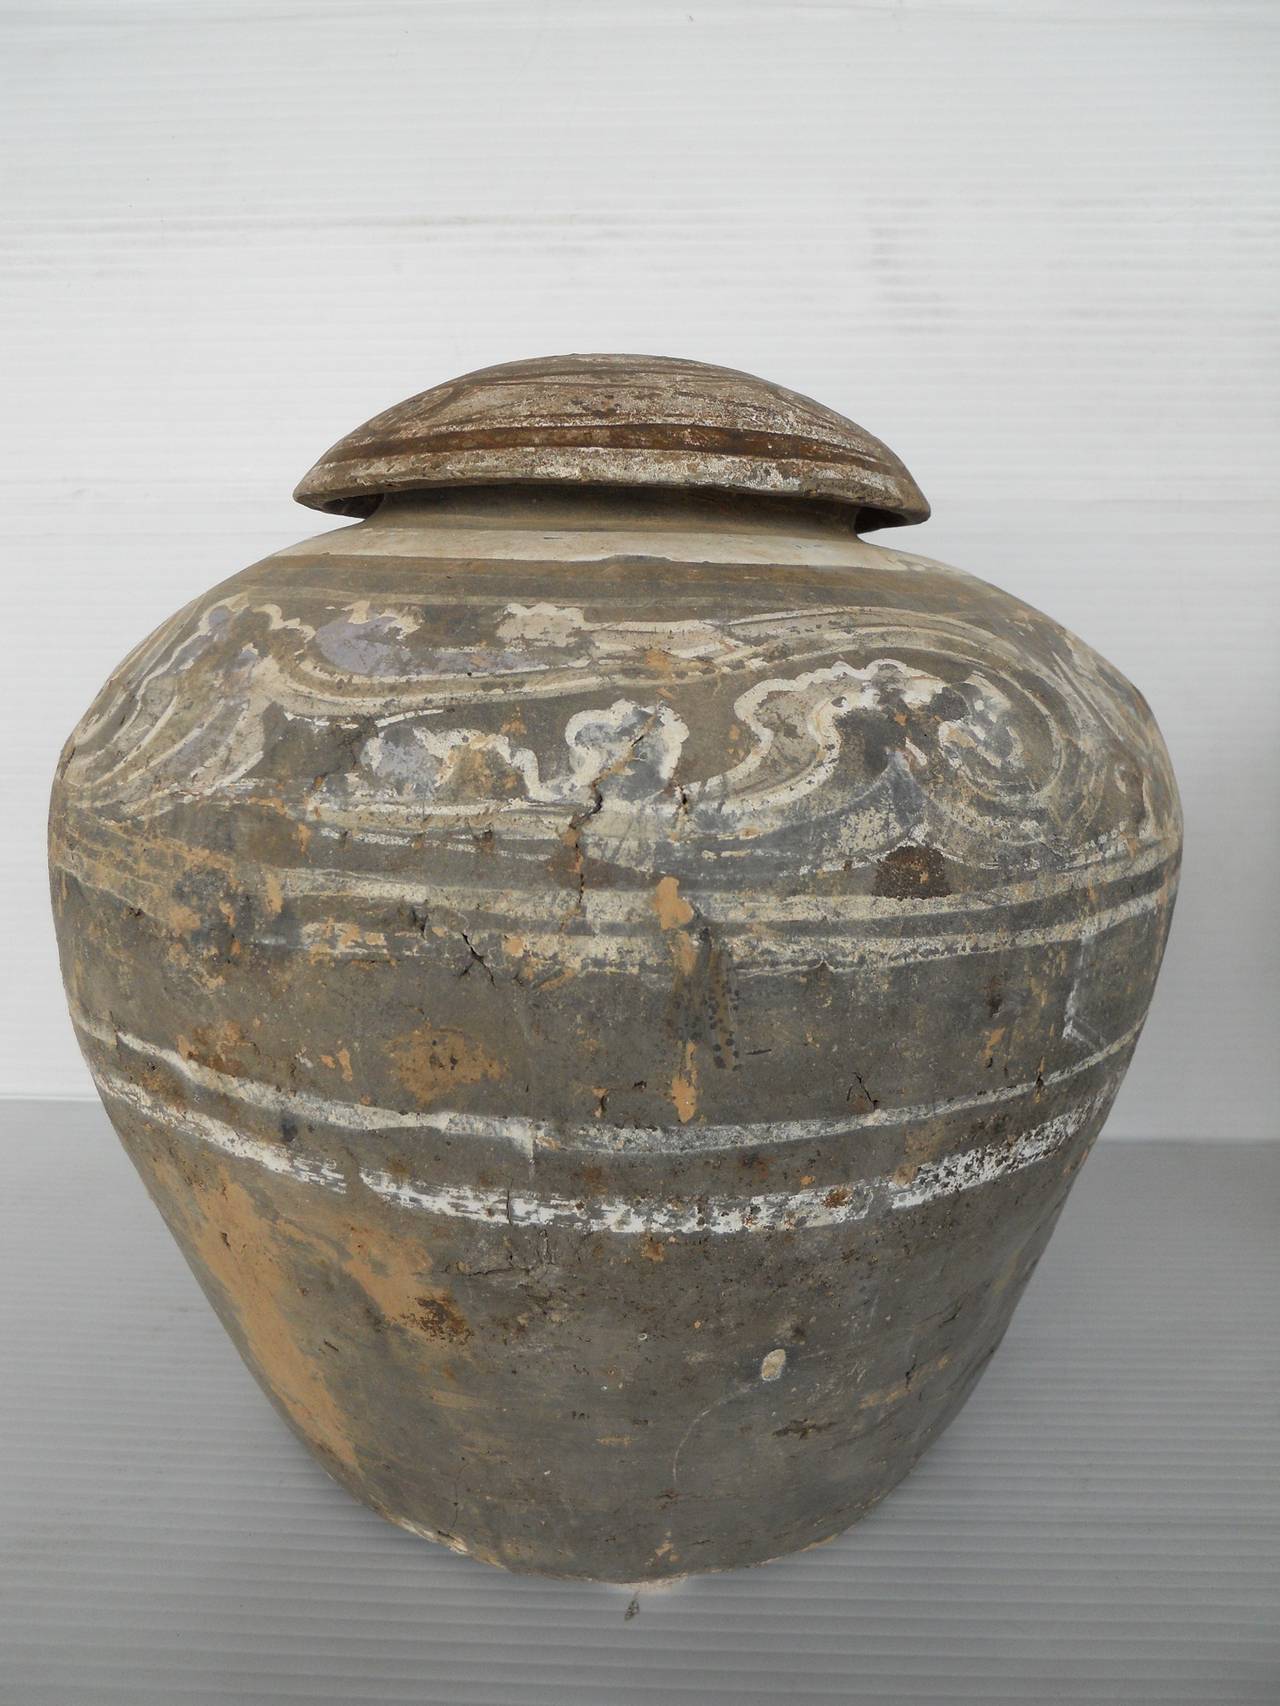 Han dynasty set of urn and vase,
circa 206 B.C. - 220 A.D.
The dimensions below are for the urn on the left.
The dimensions for the vase on the right: 14